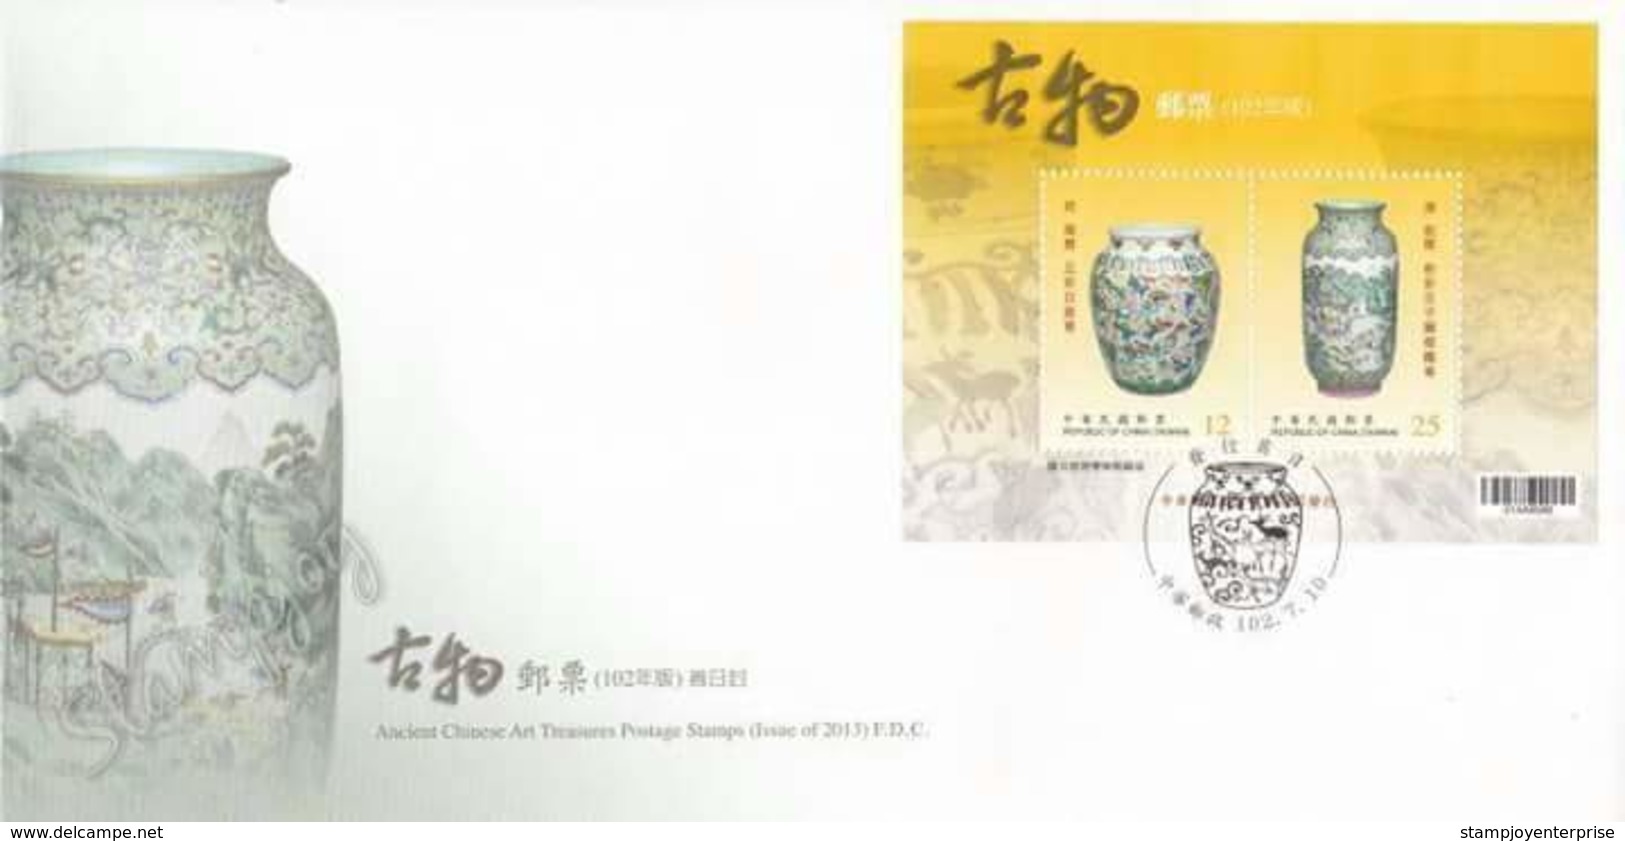 Taiwan Ancient Chinese Art Treasures 2013 (miniture FDC) - Covers & Documents